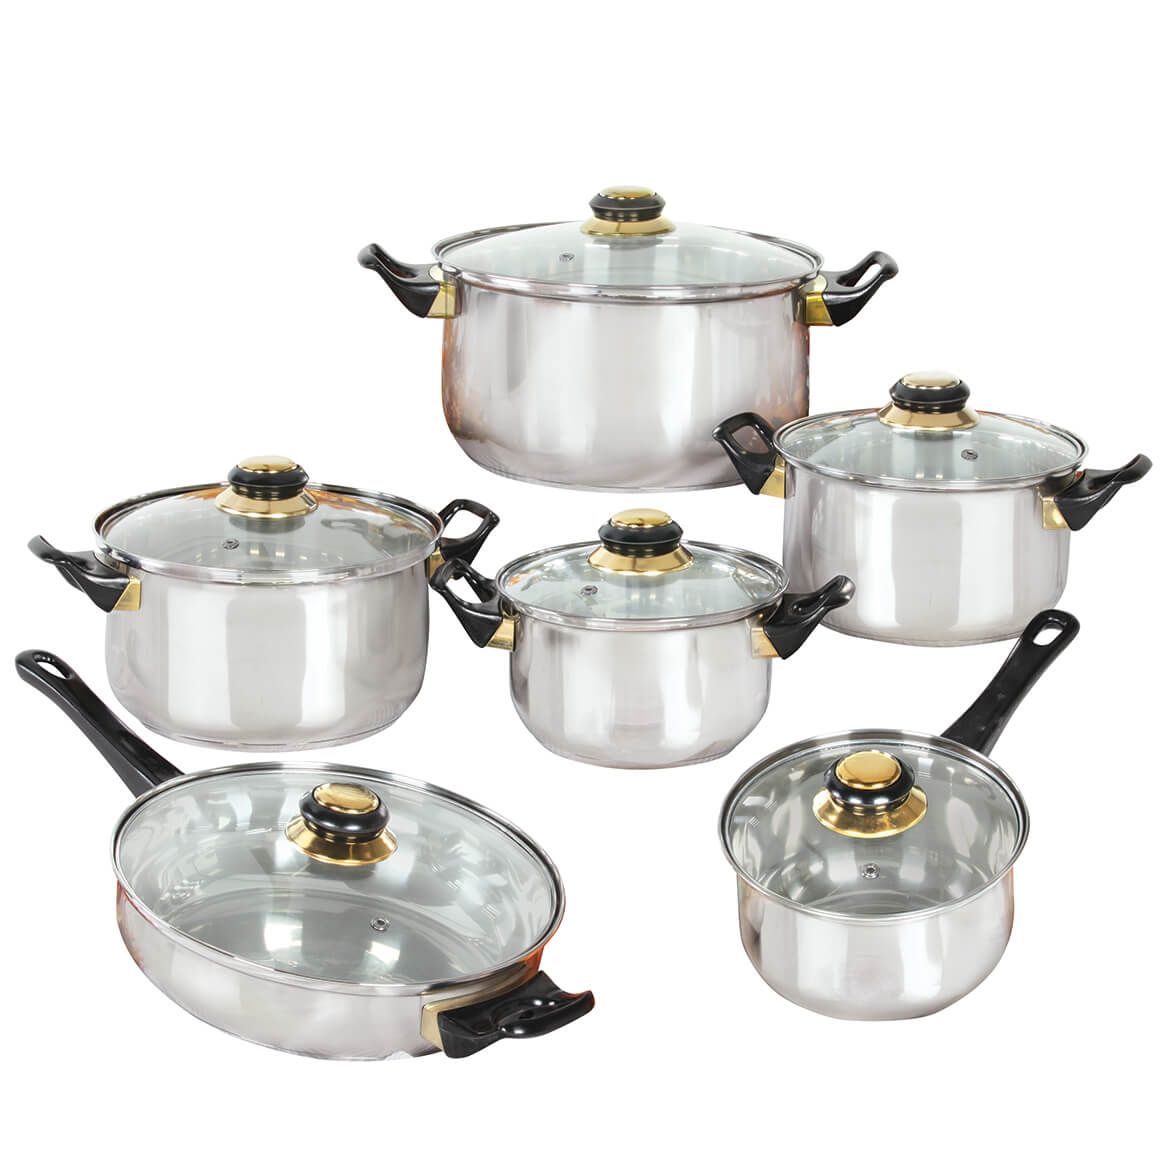 Deluxe 12 Pc. Stainless Steel Cookware Set + '-' + 369767